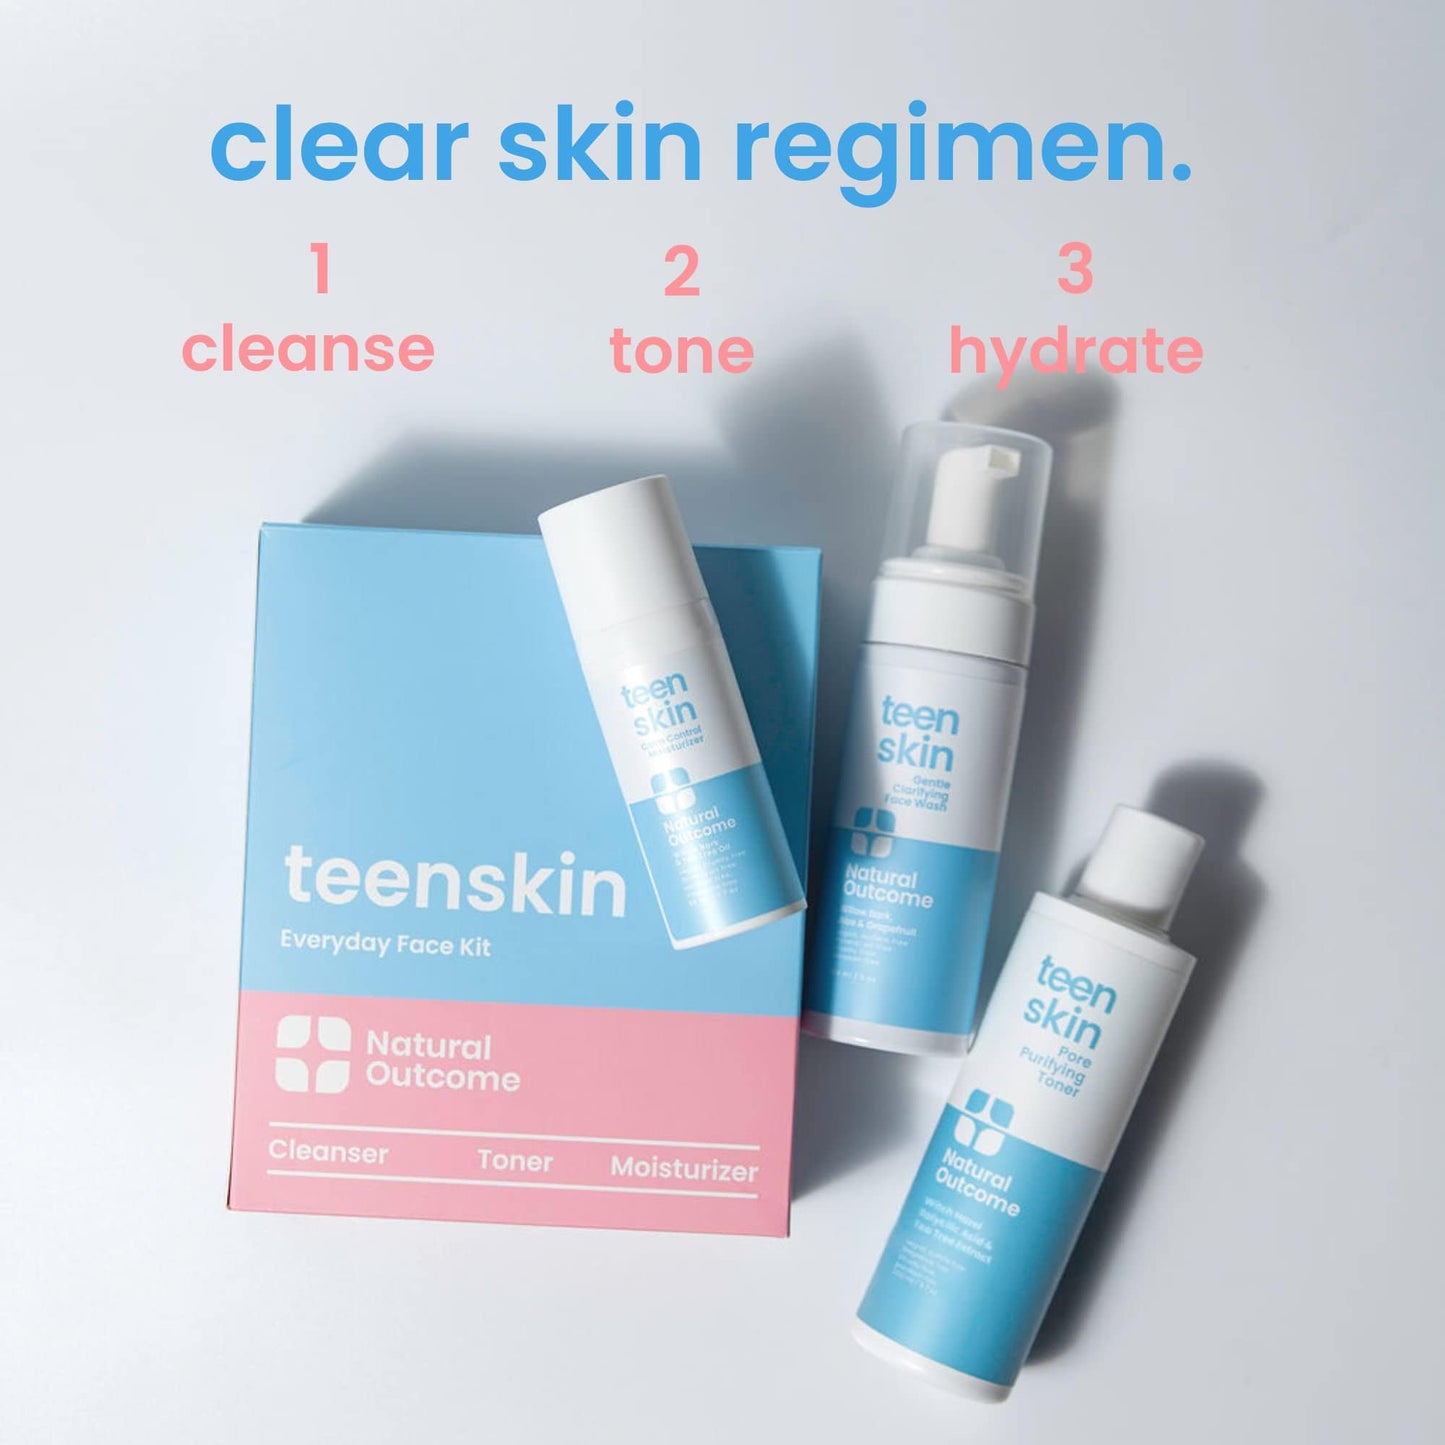 Teen Skin 3-Step Skin Care Kit, Daily Boys & Girls Skin Care Regimen, Face Wash, Toner, & Moisturizer, Perfect for Teens Preteens & Kids Looking to Prevent Acne